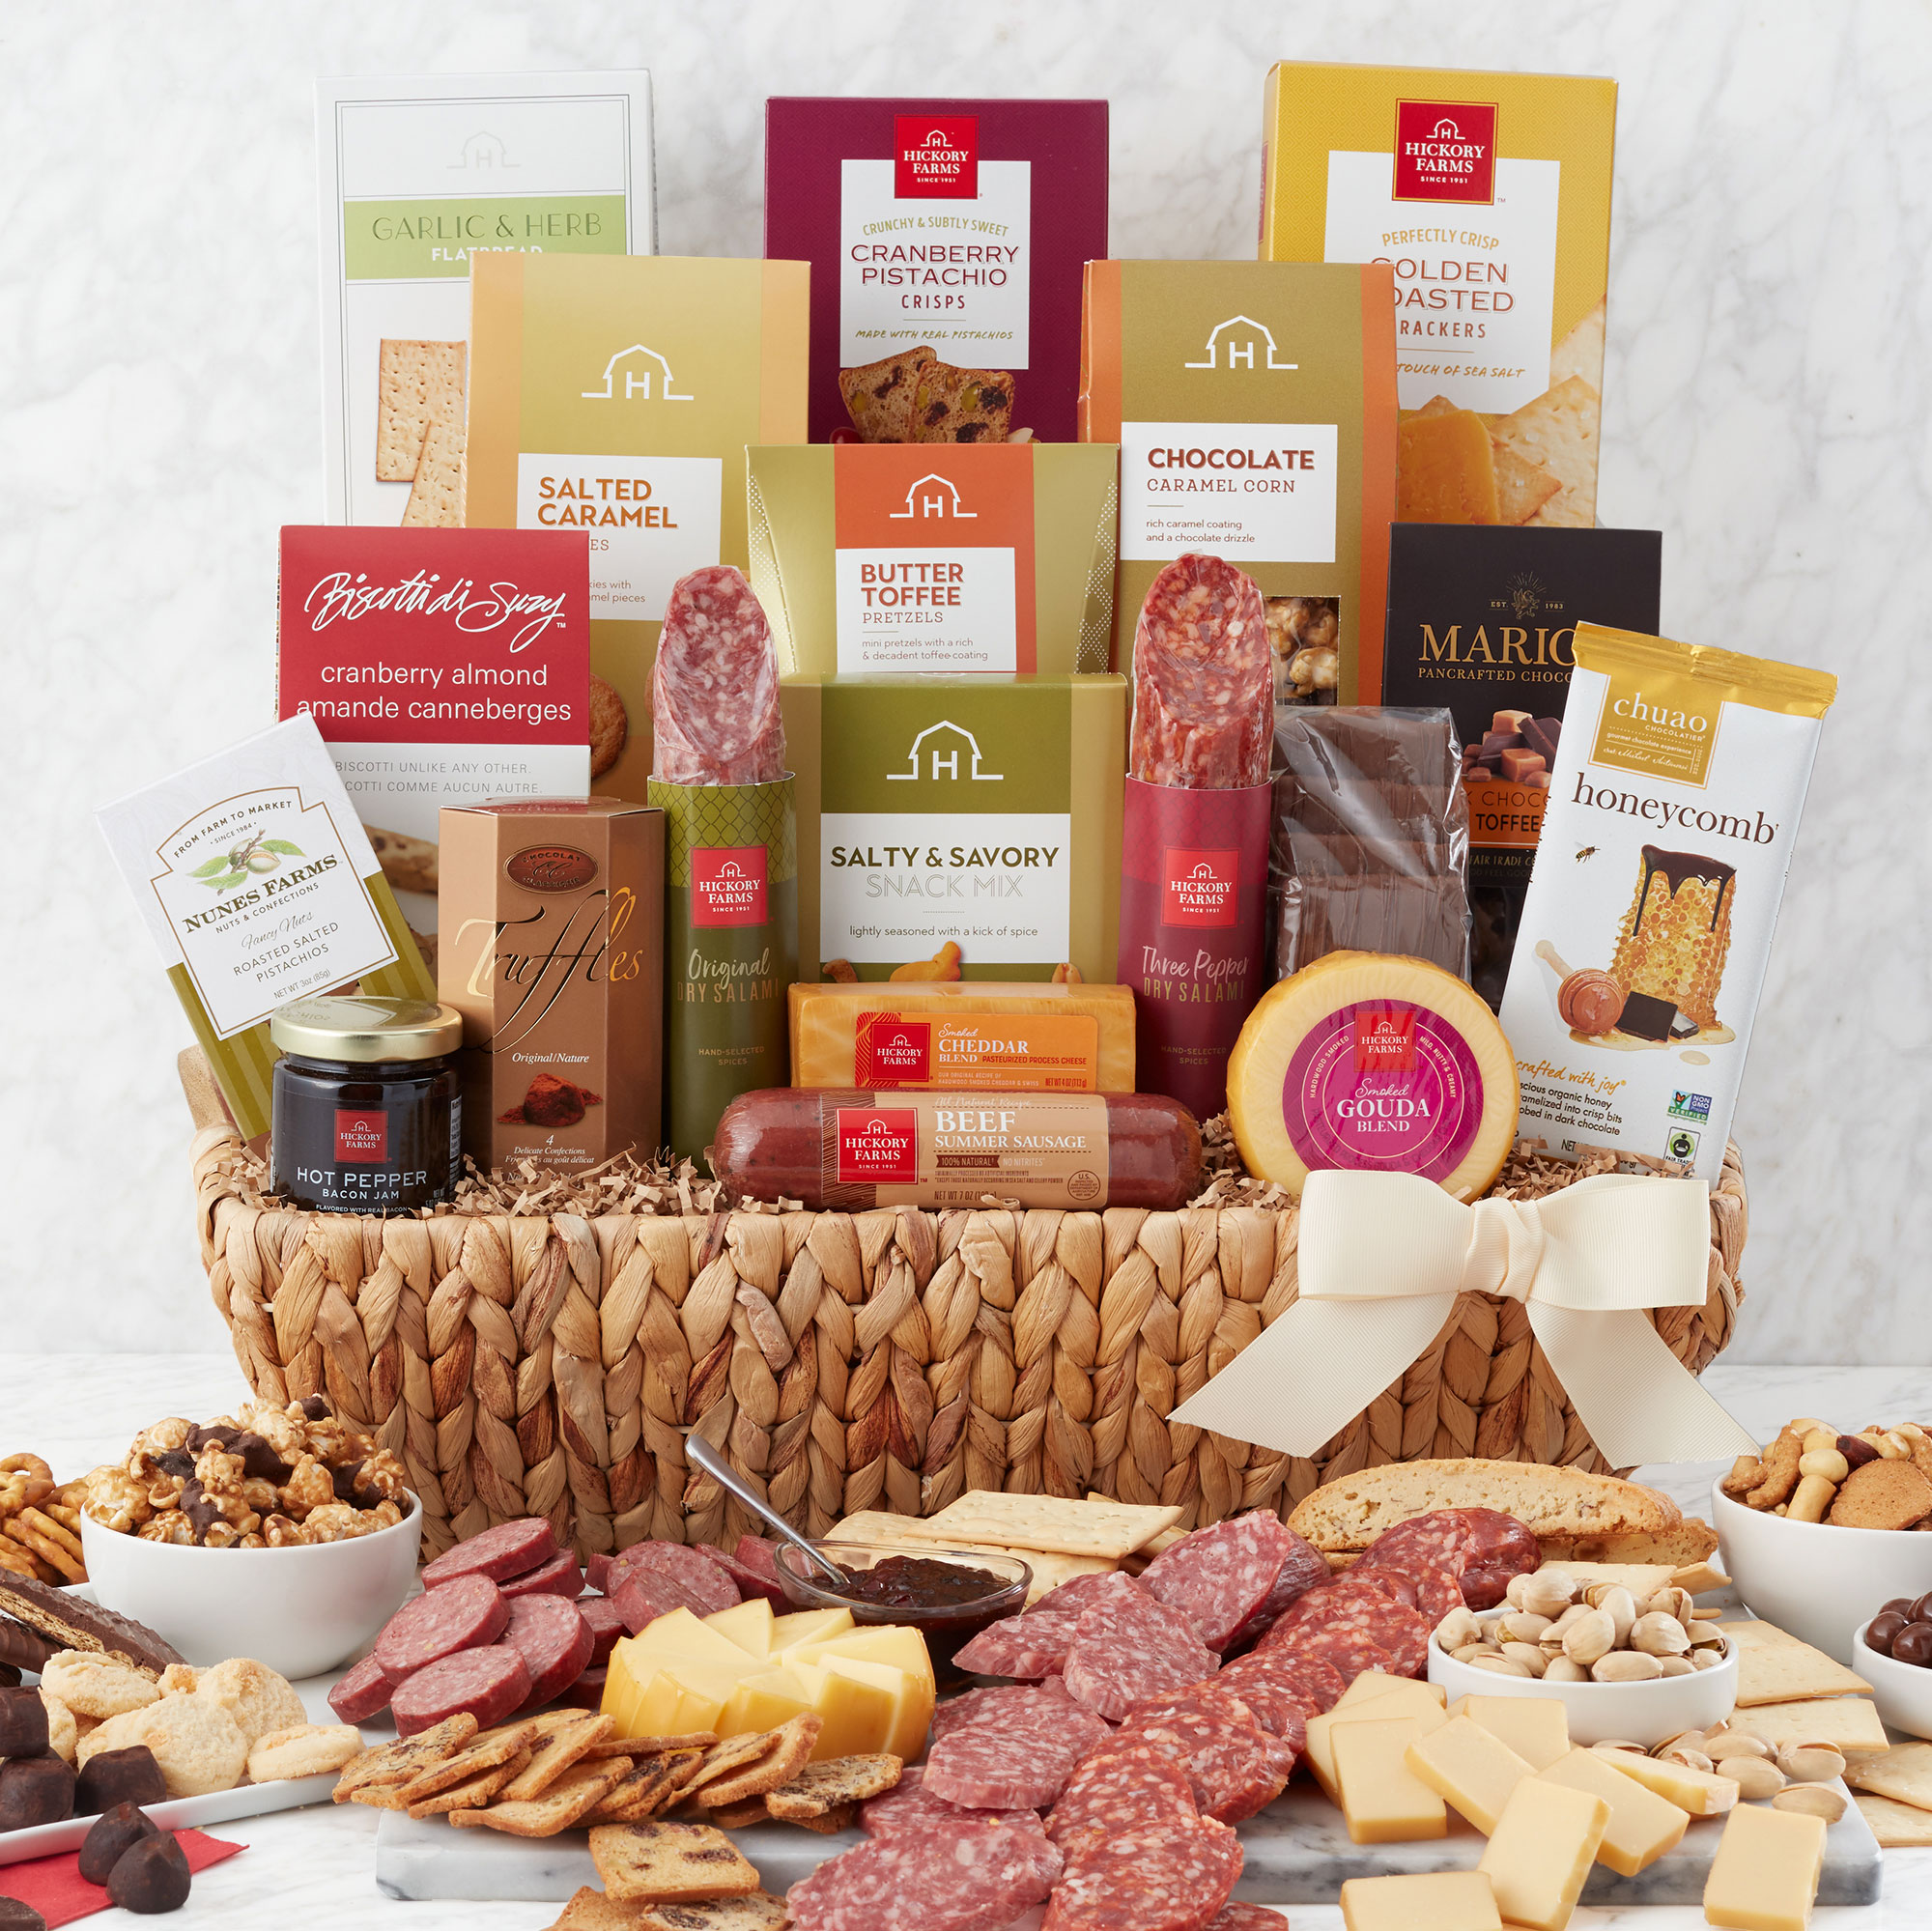 Buy our grand gourmet mother's day gift basket at